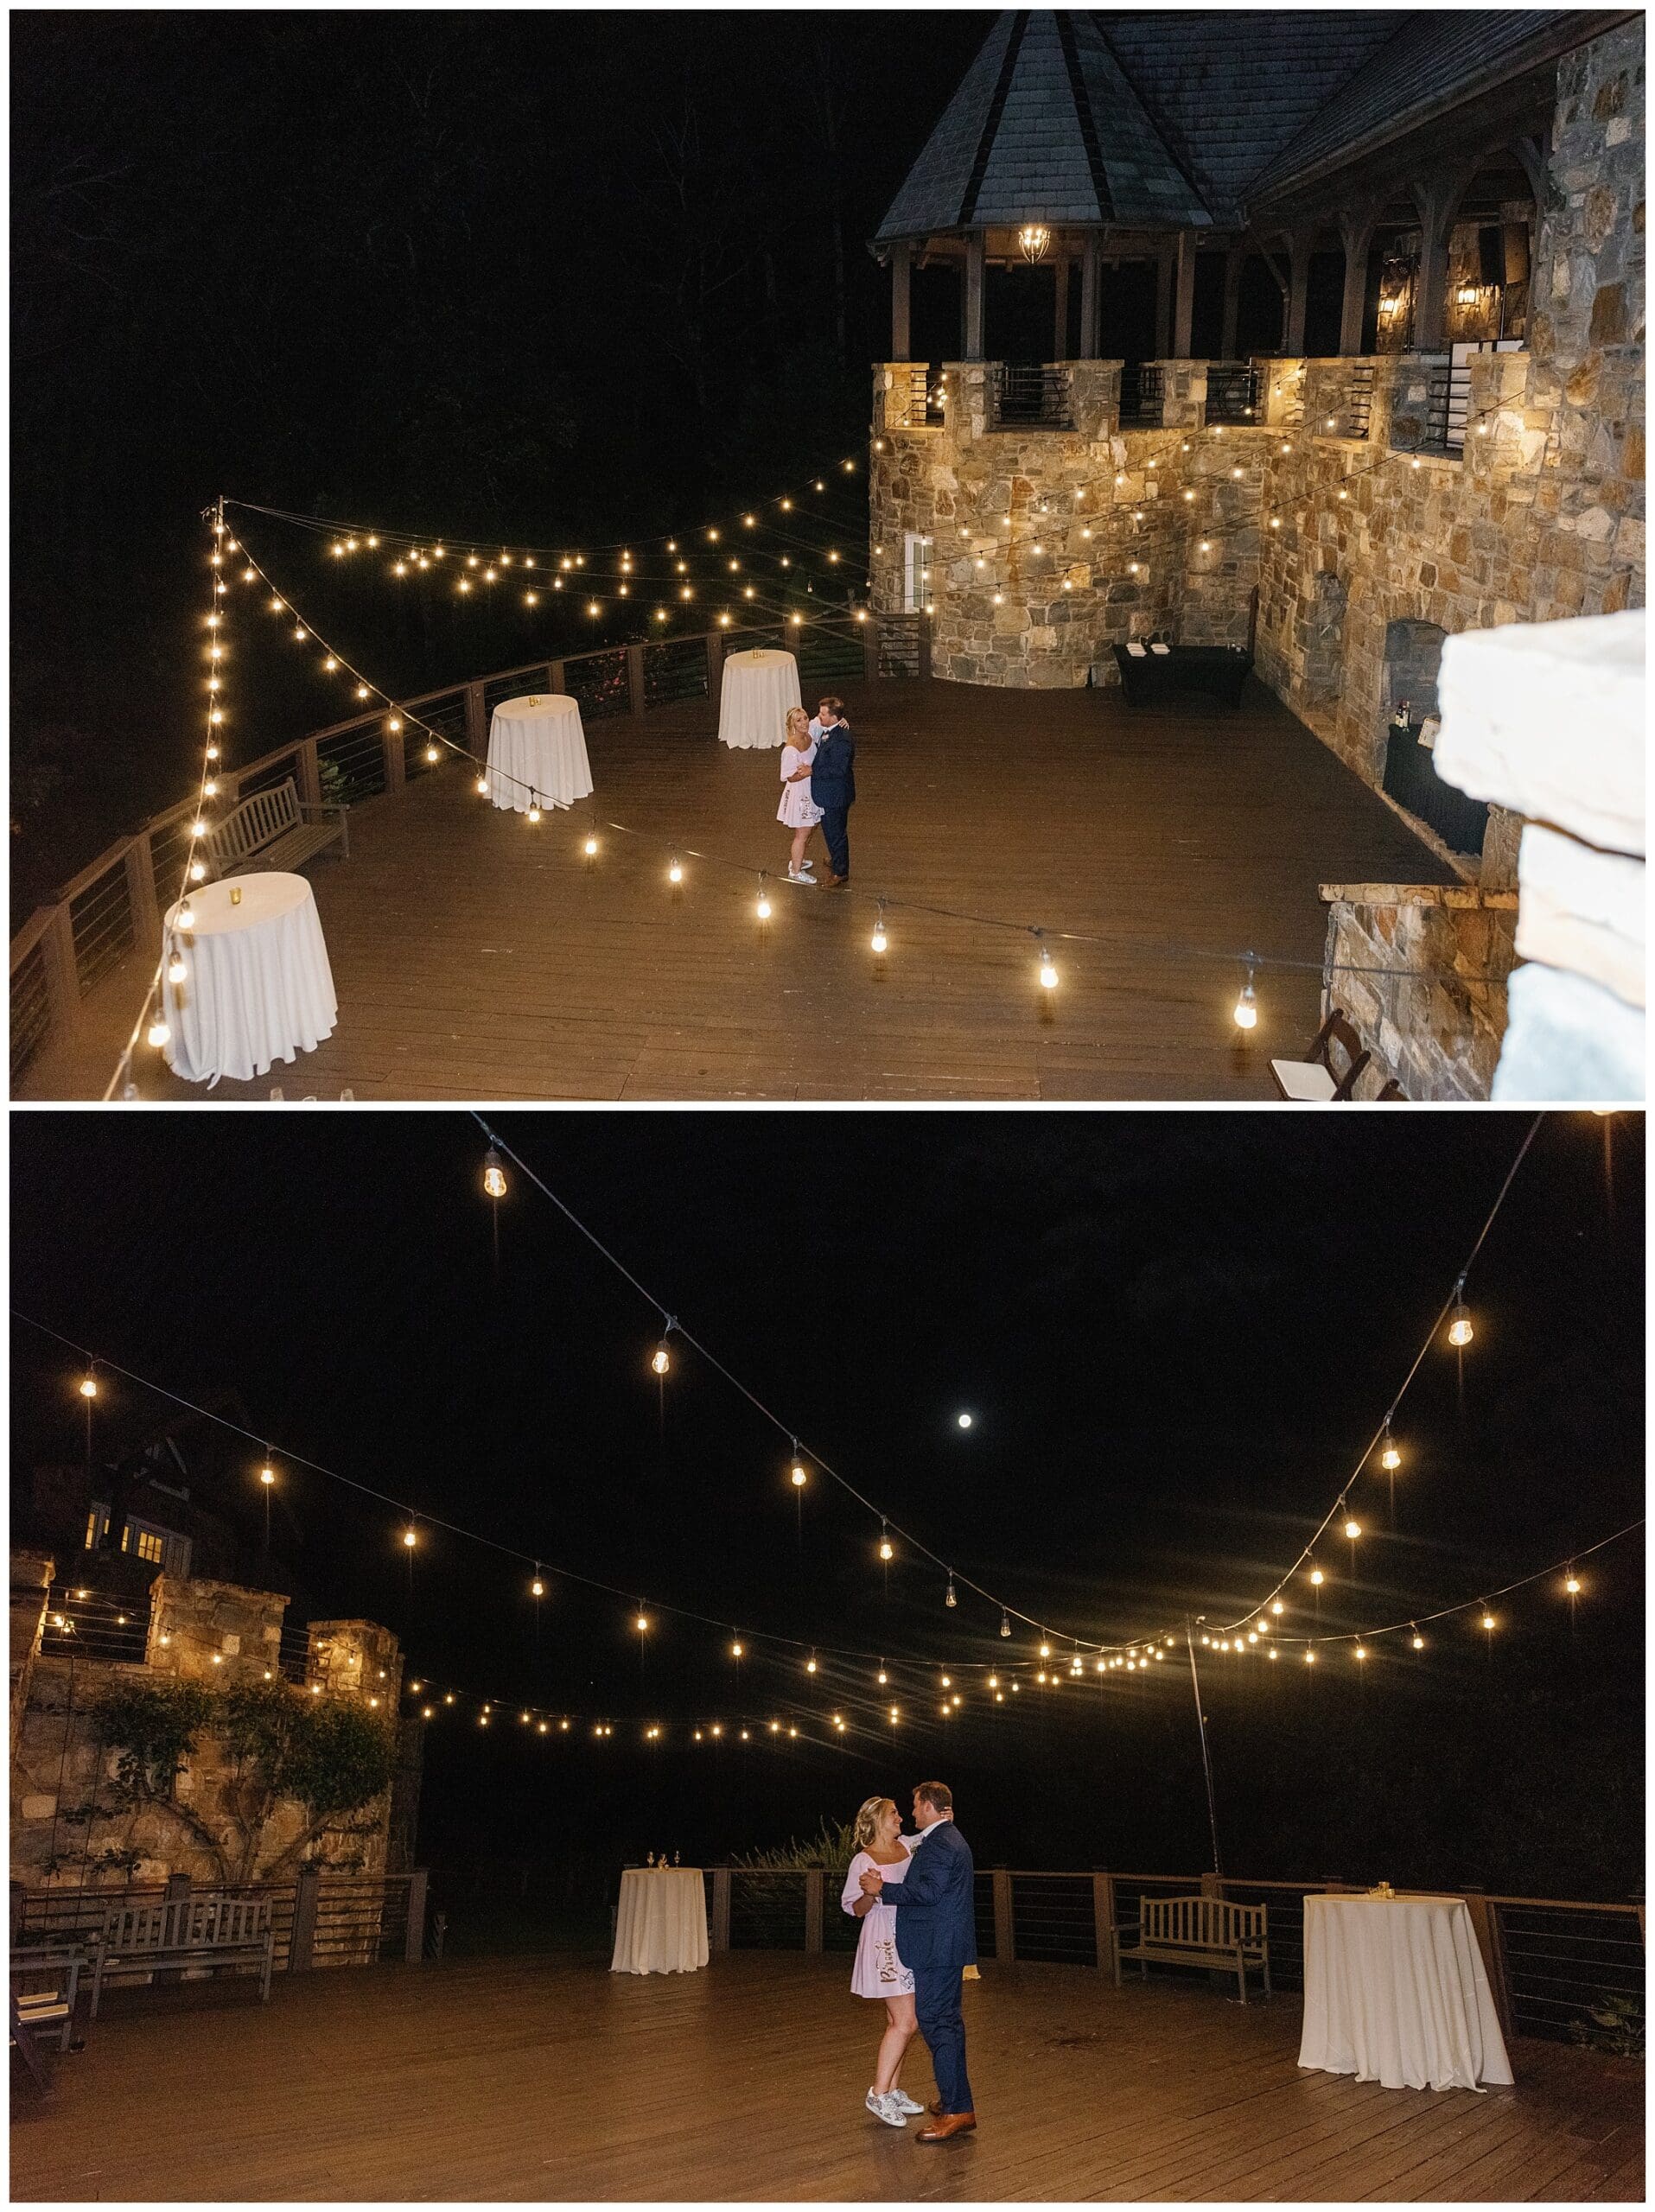 A bride and groom dancing on a deck at night for their private last dance.